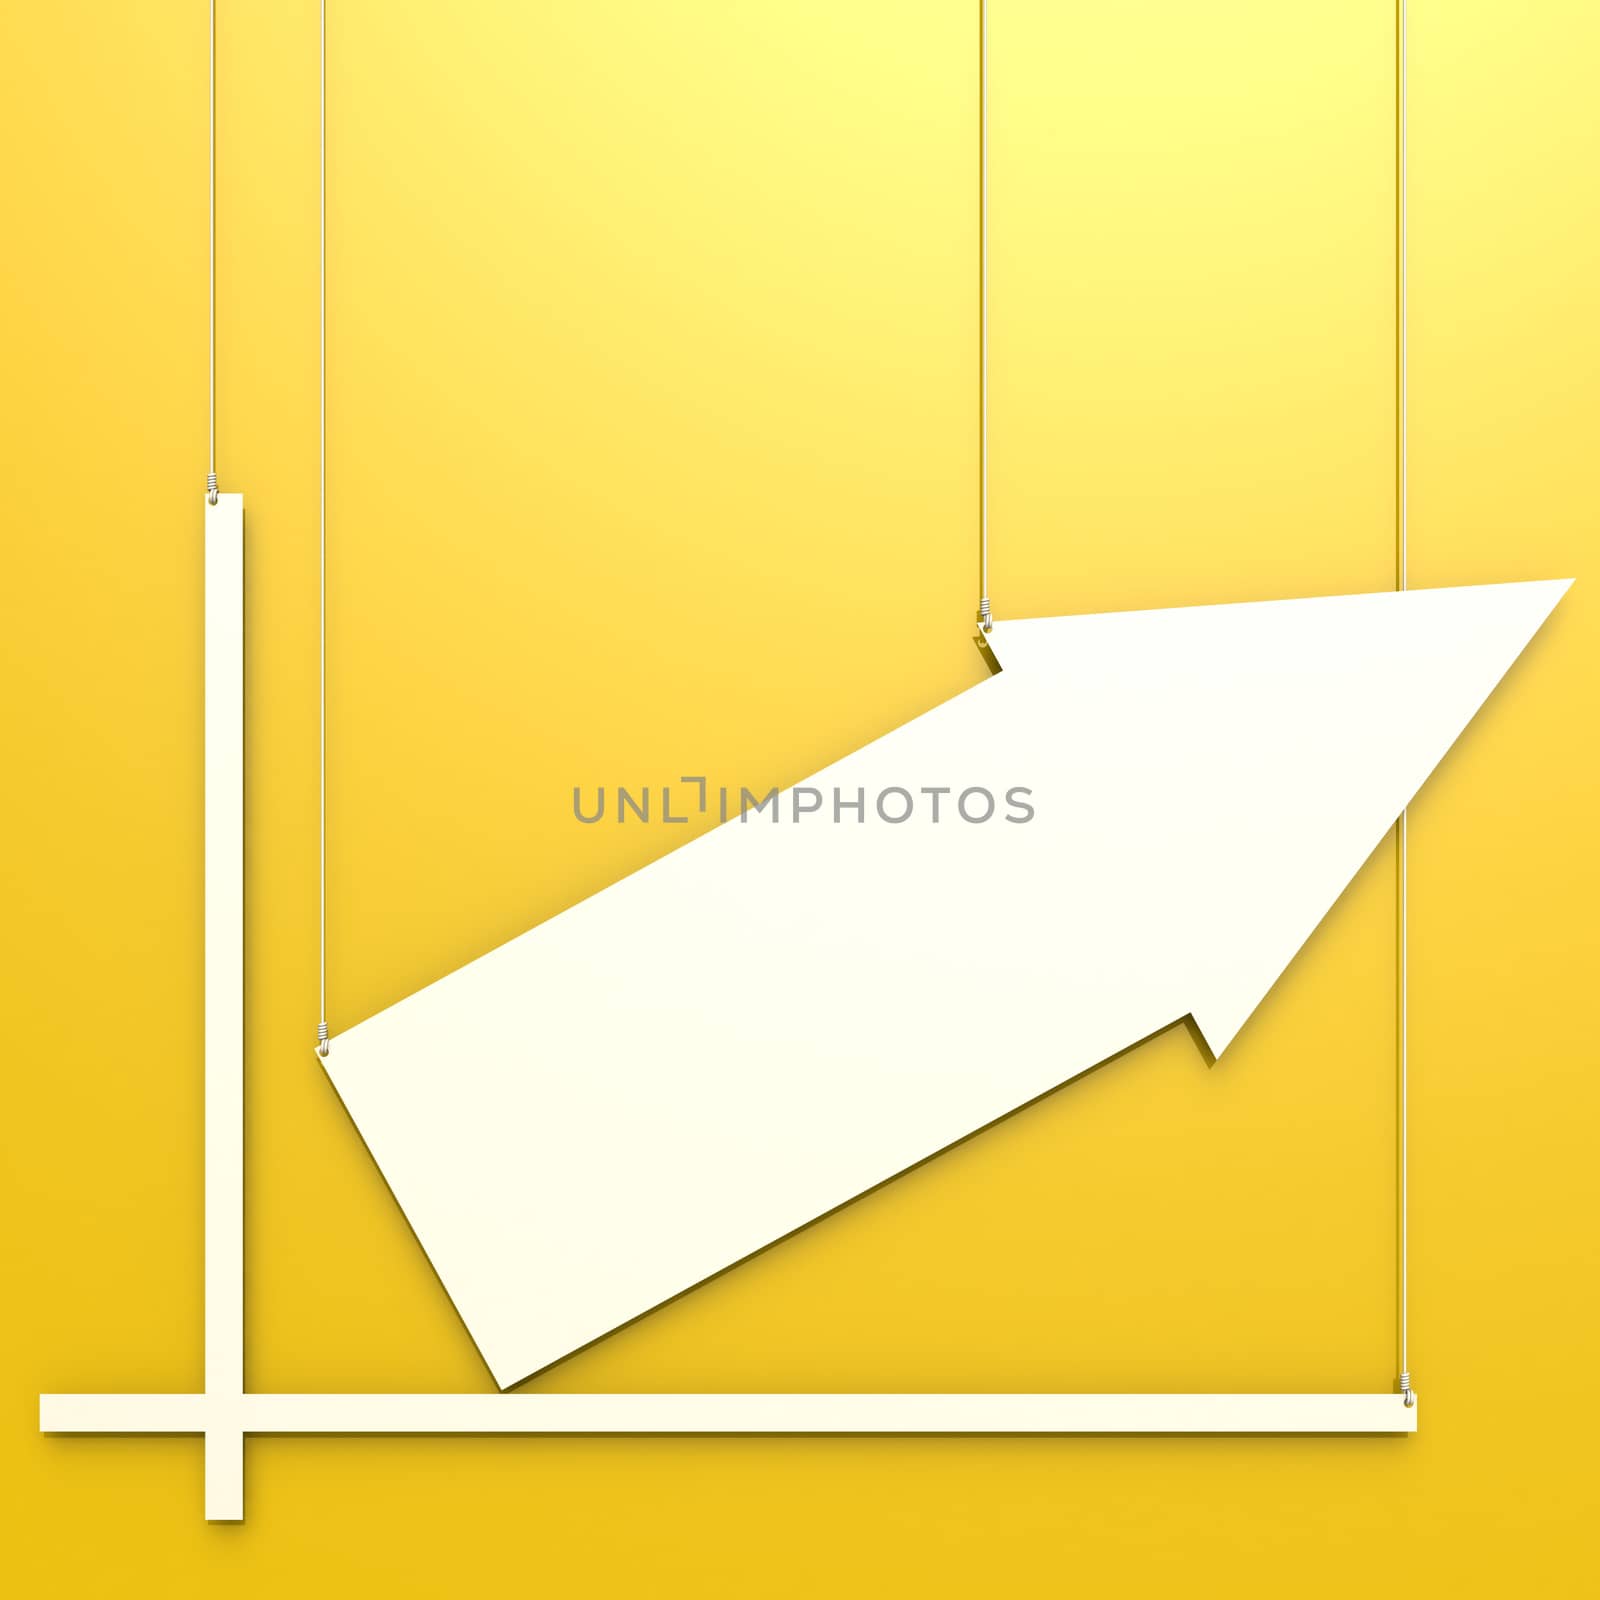 Blank chart hang on yellow background image with hi-res rendered artwork that could be used for any graphic design.